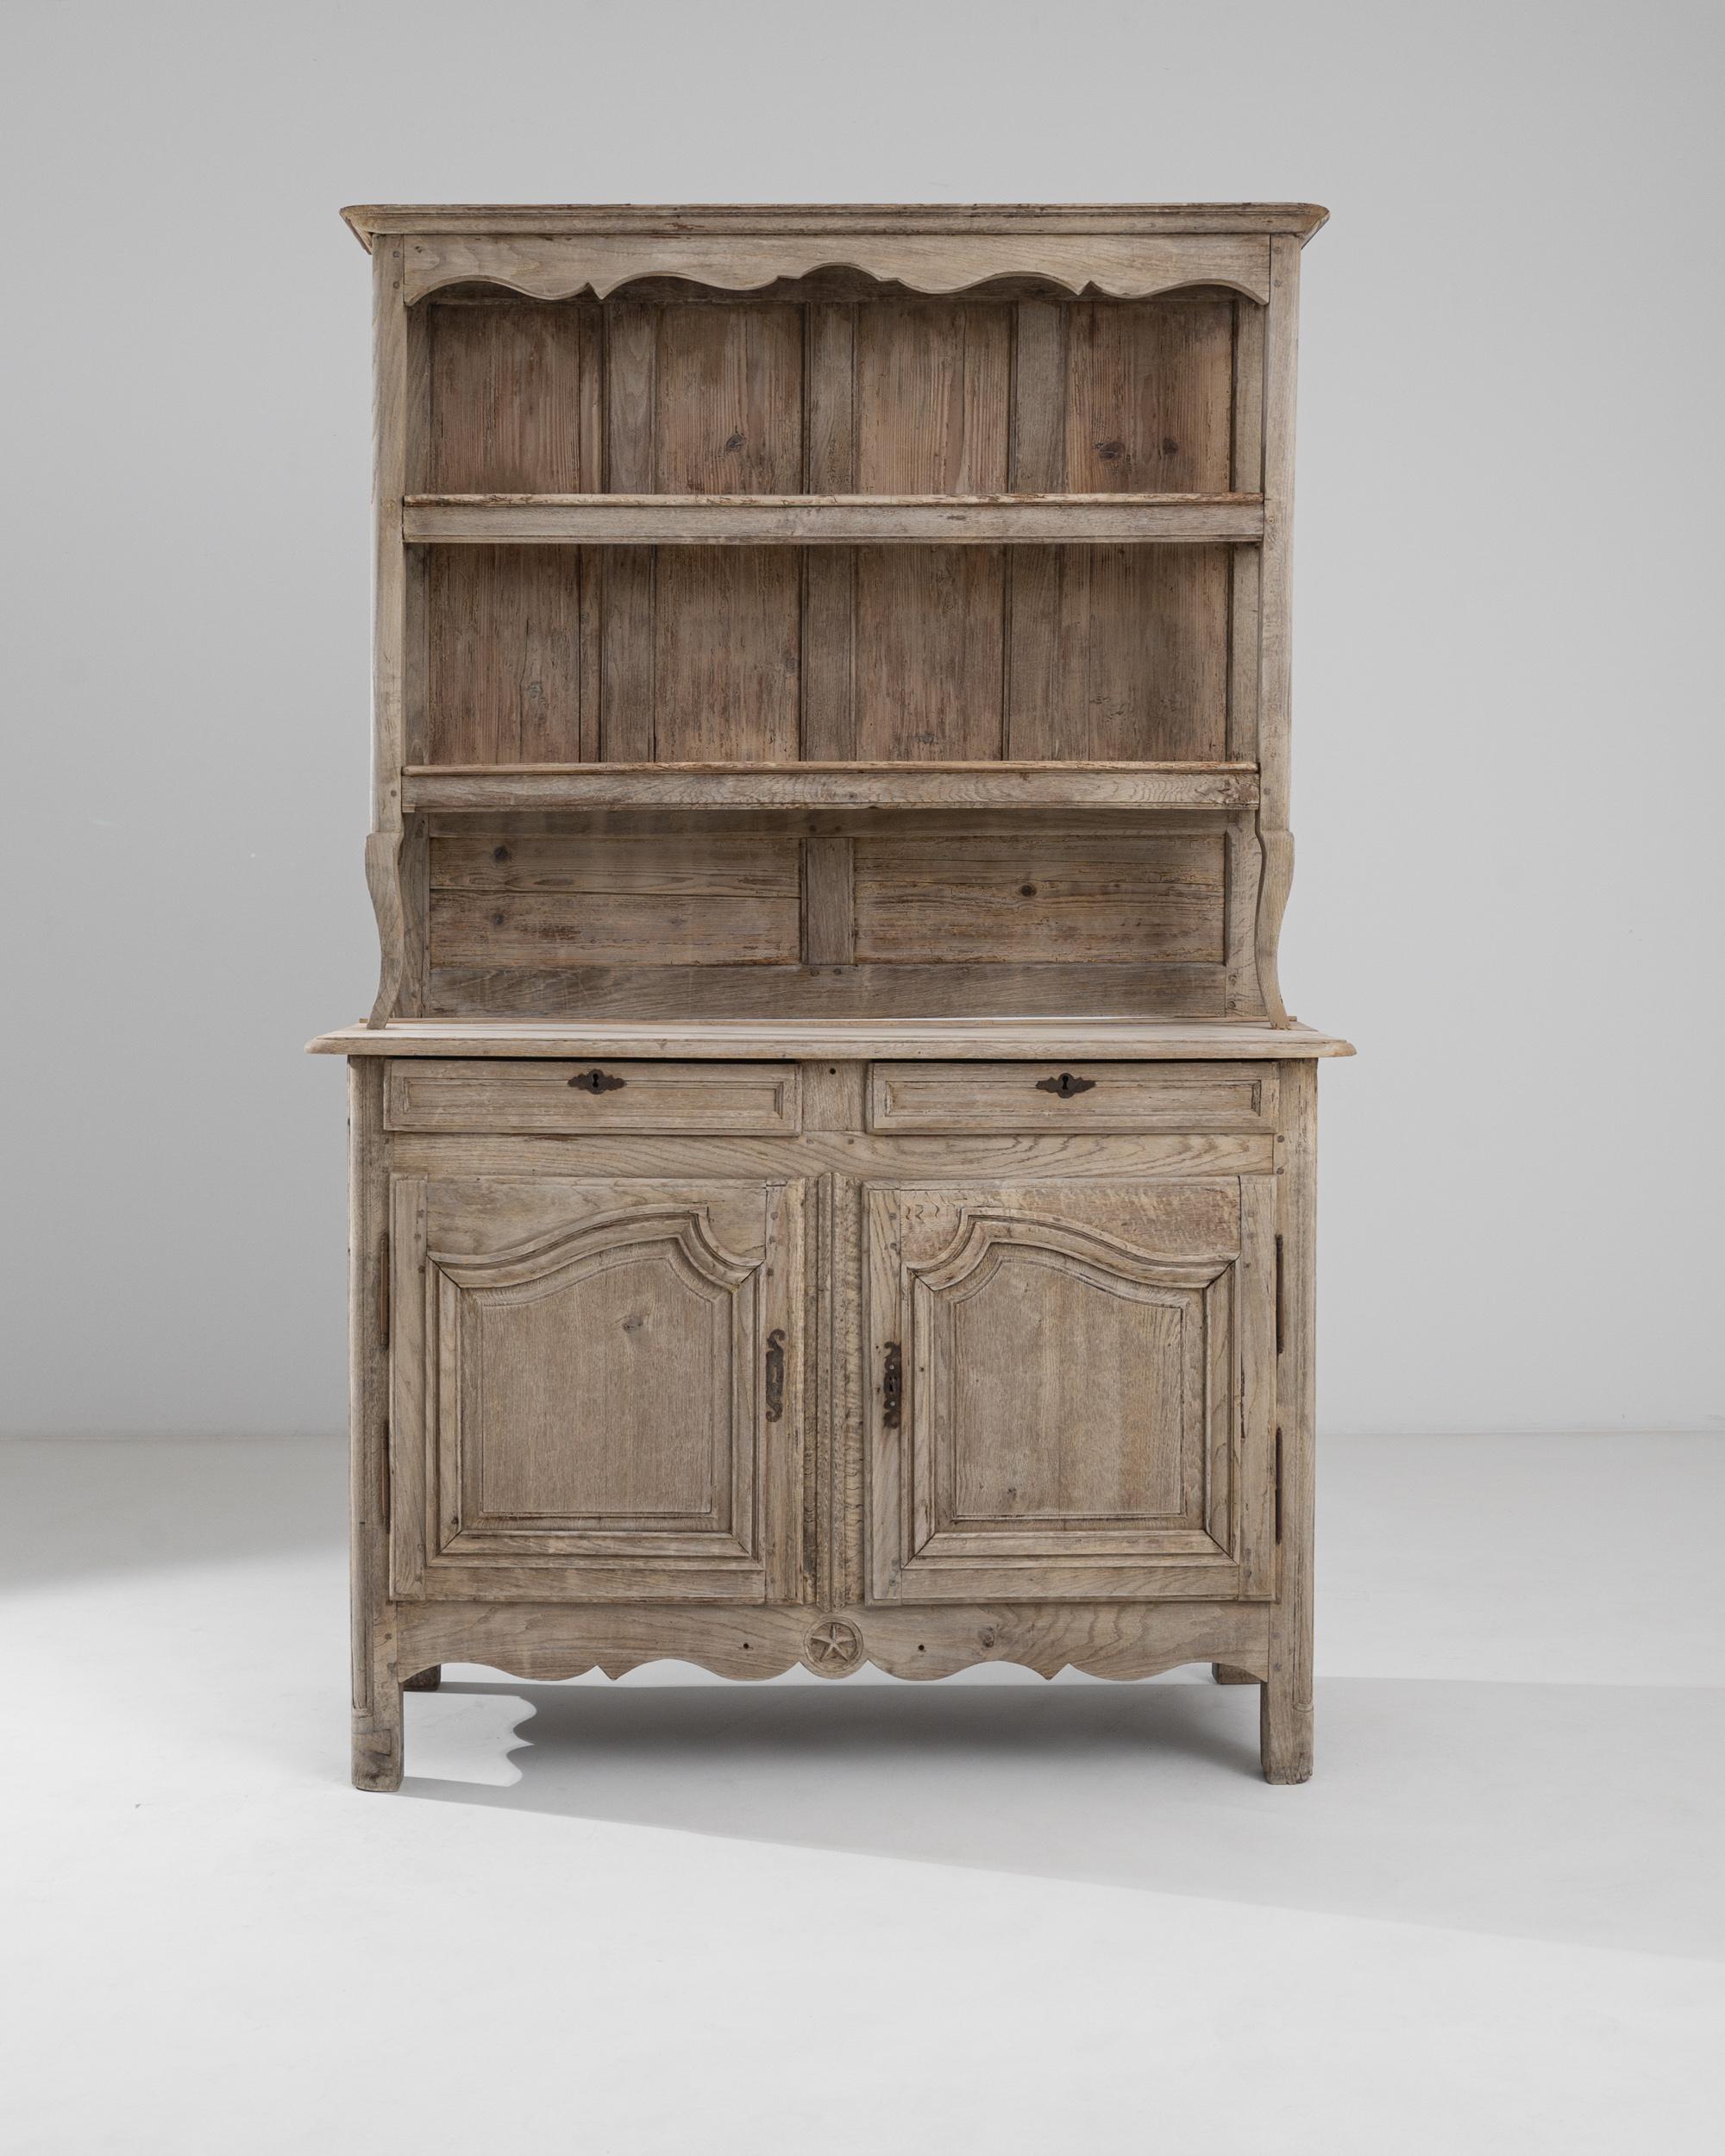 A wooden display cabinet from 19th century France. This neo-classically inspired china cabinet features three upper shelves, a desk surface, two sliding drawers, and lower storage compartments. Pleasant curved scroll patterns are carved along its